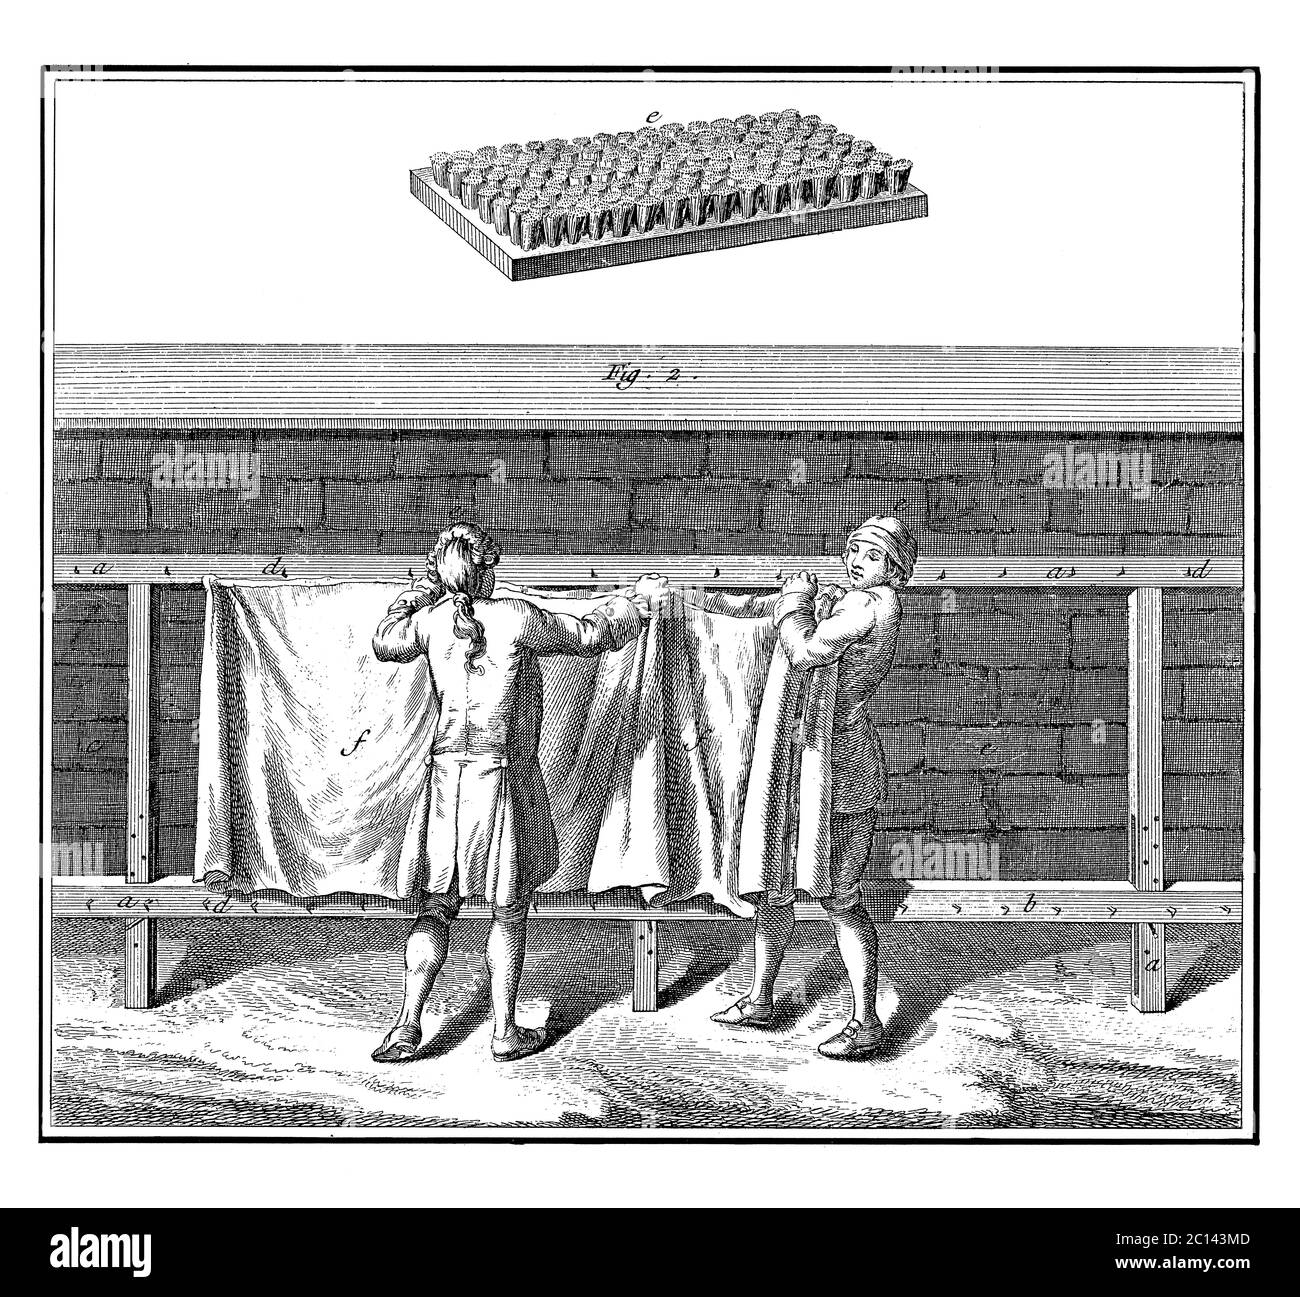 Antique illustration of how worken put cloth on drying racks, above them is a stiff brush. Published in "A Diderot Pictorial Encyclopedia of Trades an Stock Photo